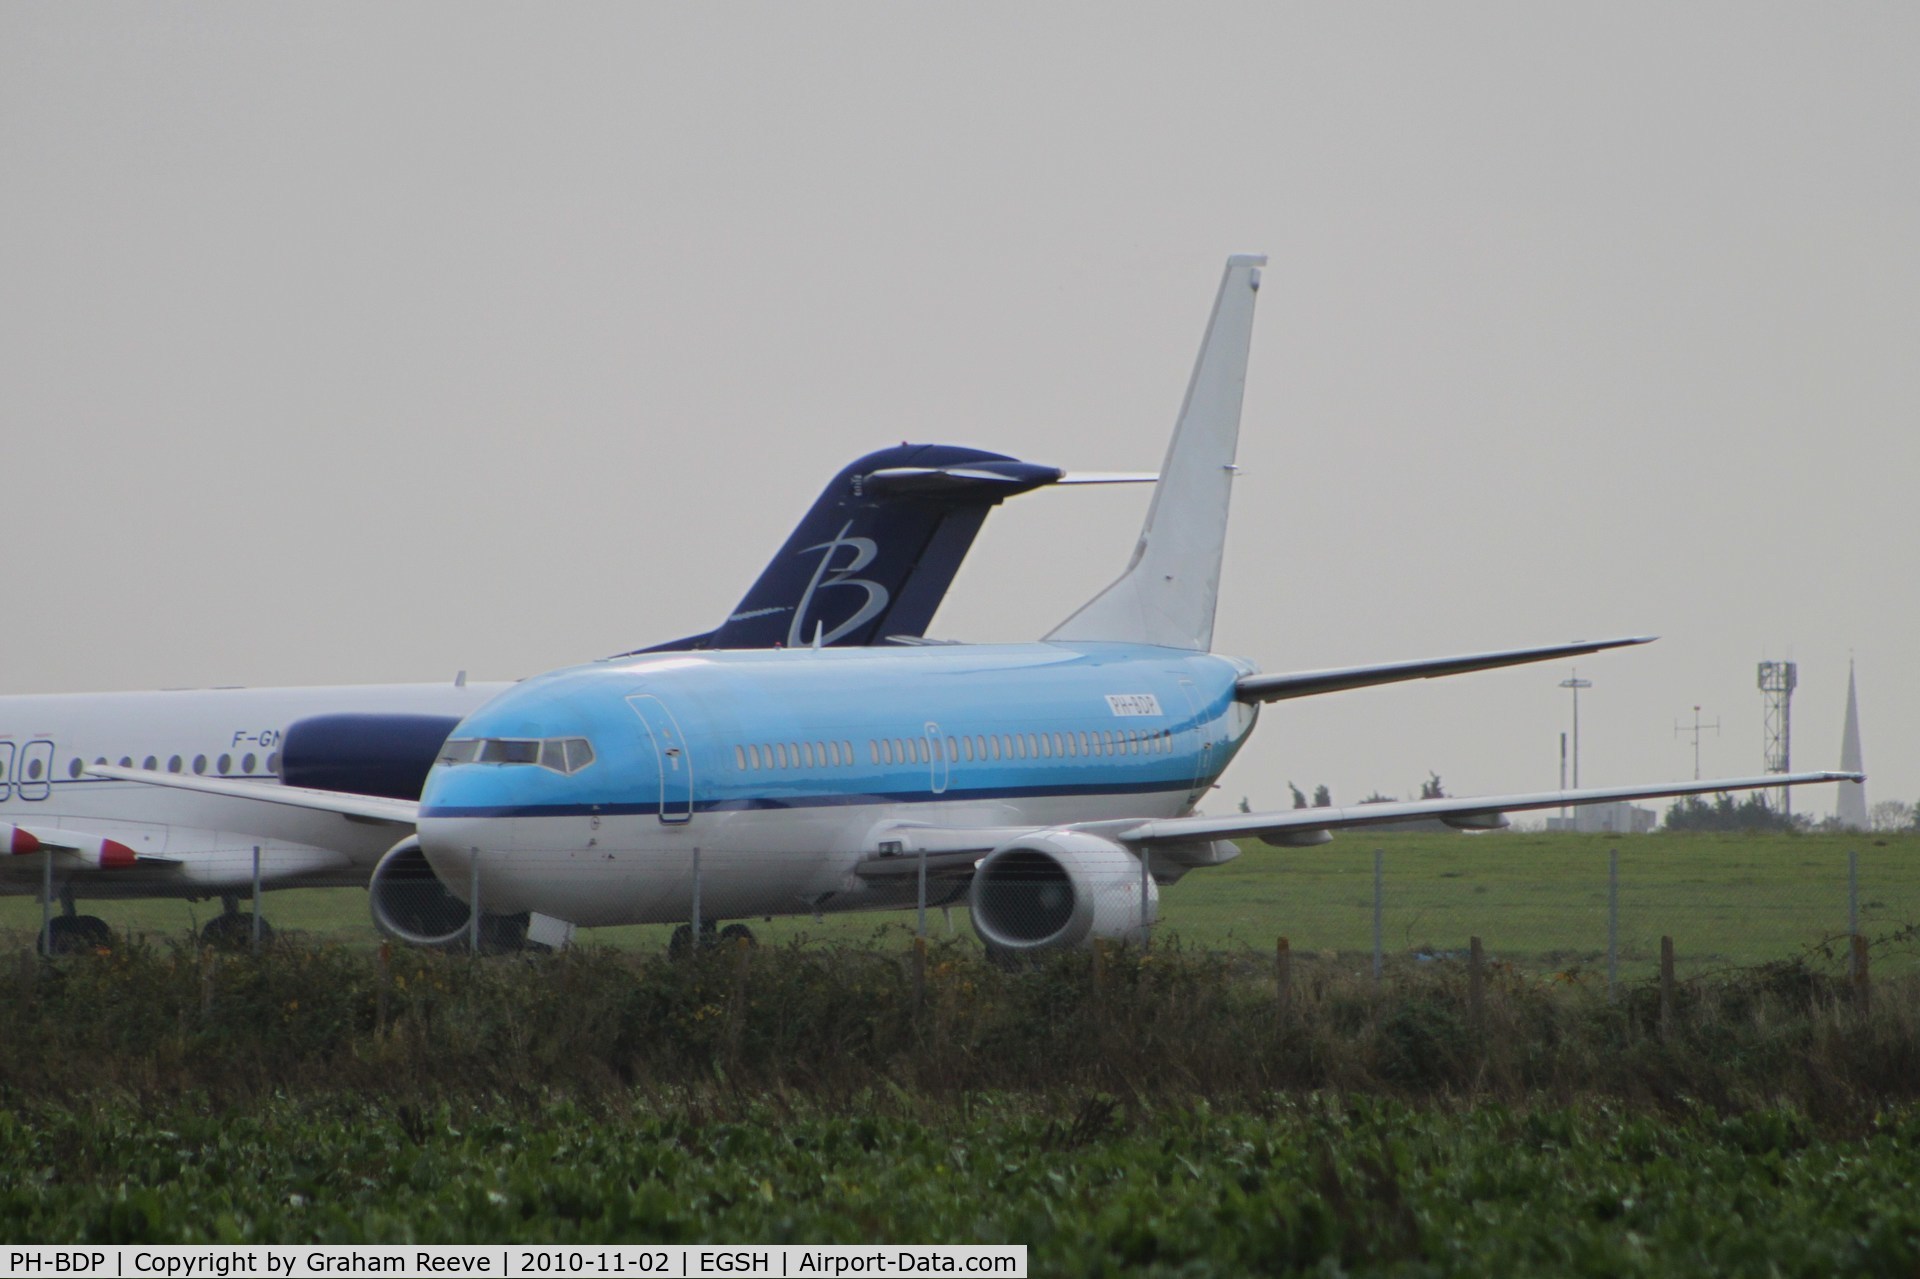 PH-BDP, 1989 Boeing 737-306 C/N 24404, With logos removed but still in KLM colours. Fokker 100 in back ground.